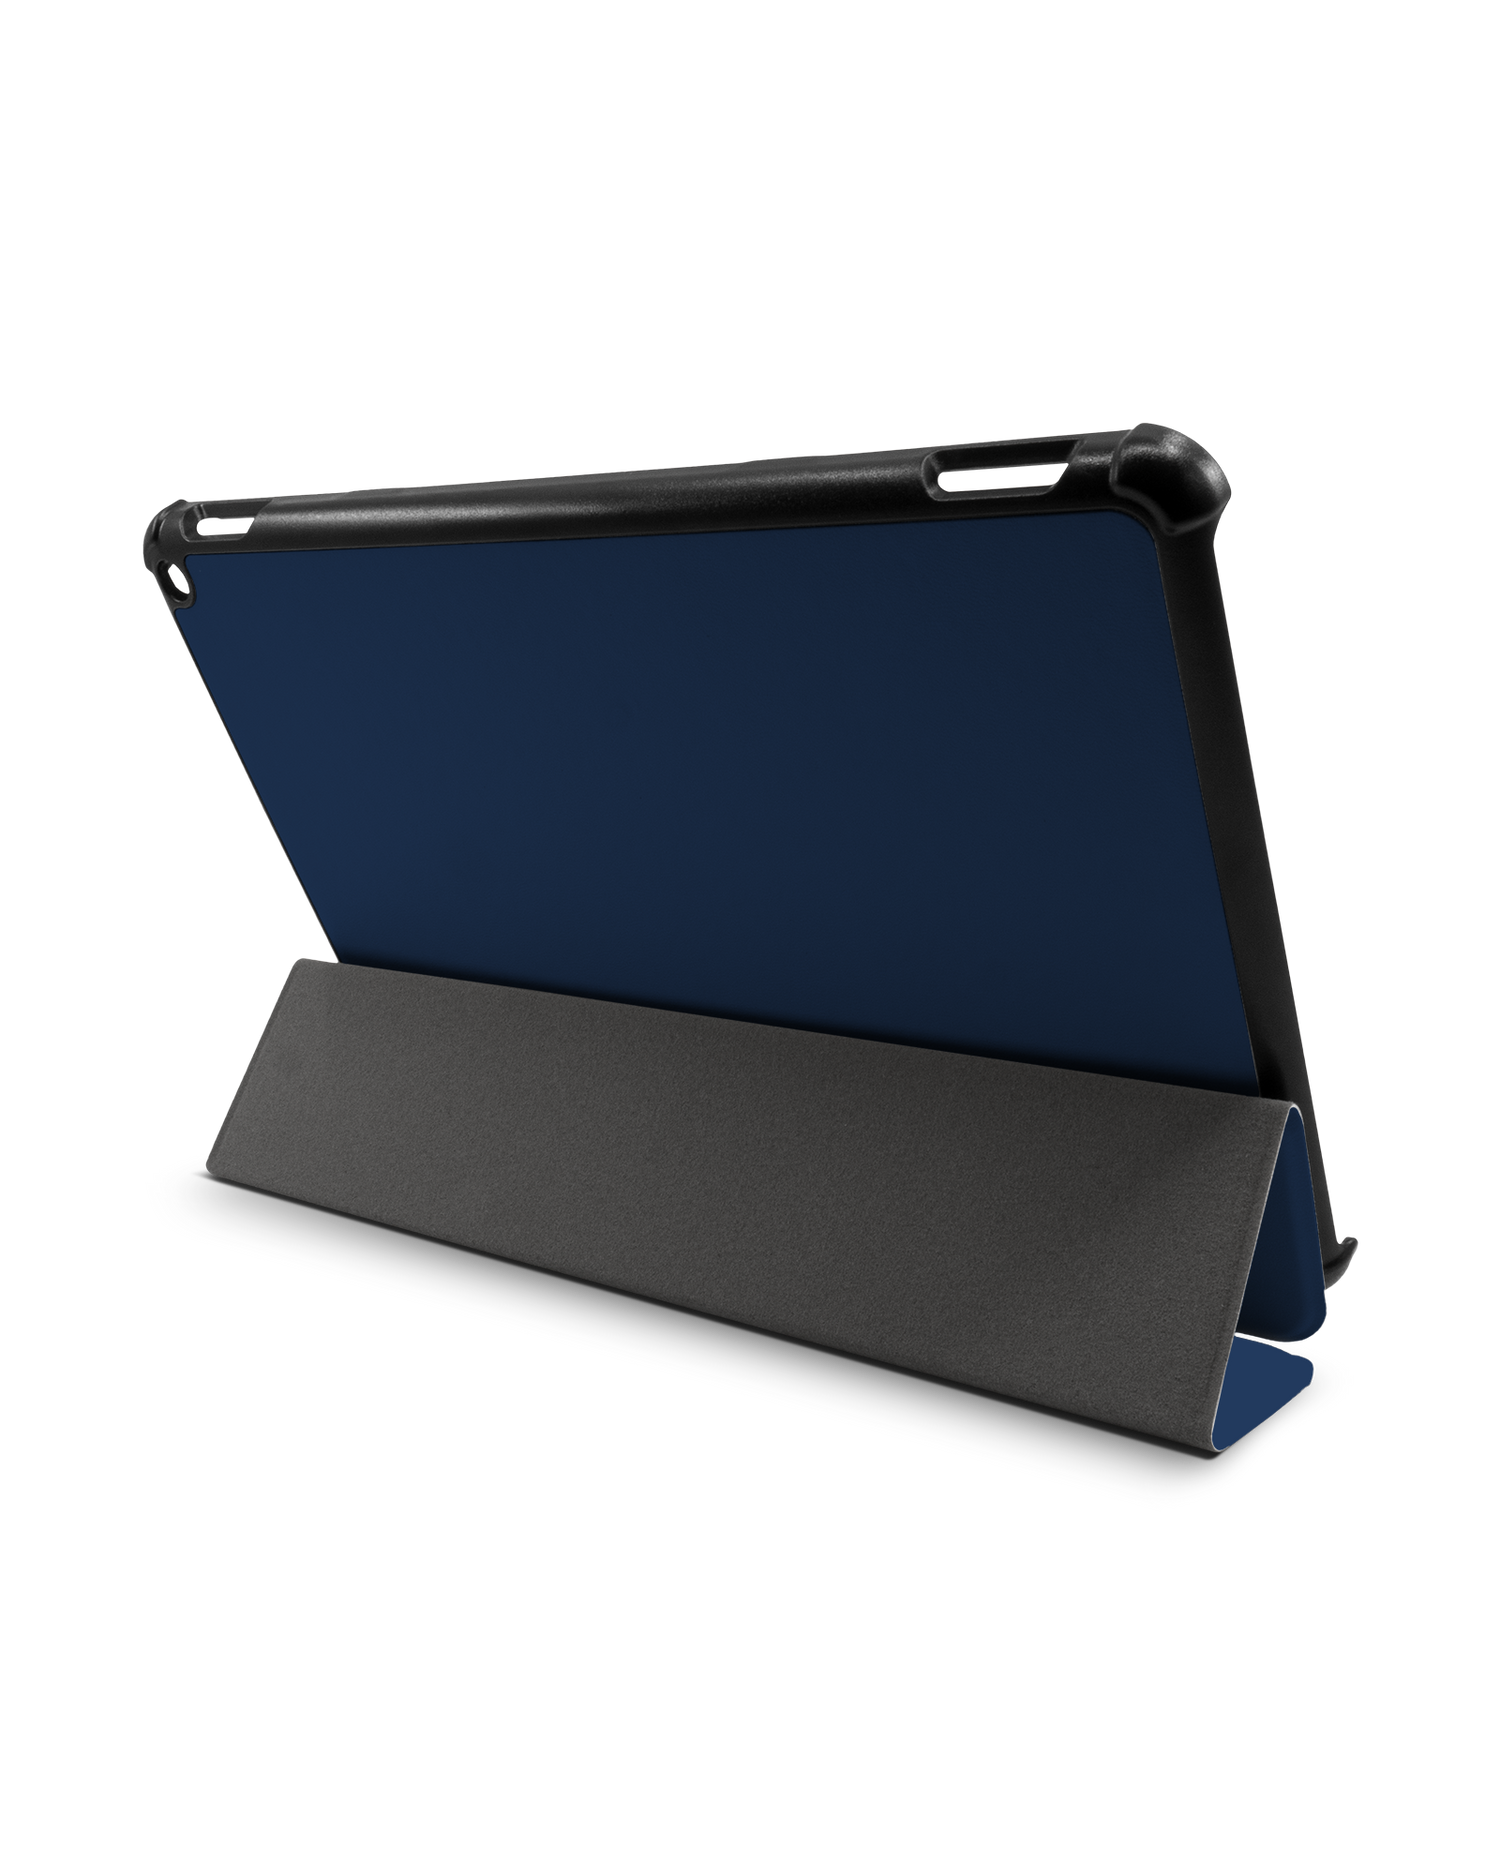 NAVY Tablet Smart Case for Amazon Fire HD 10 (2021): Used as Stand